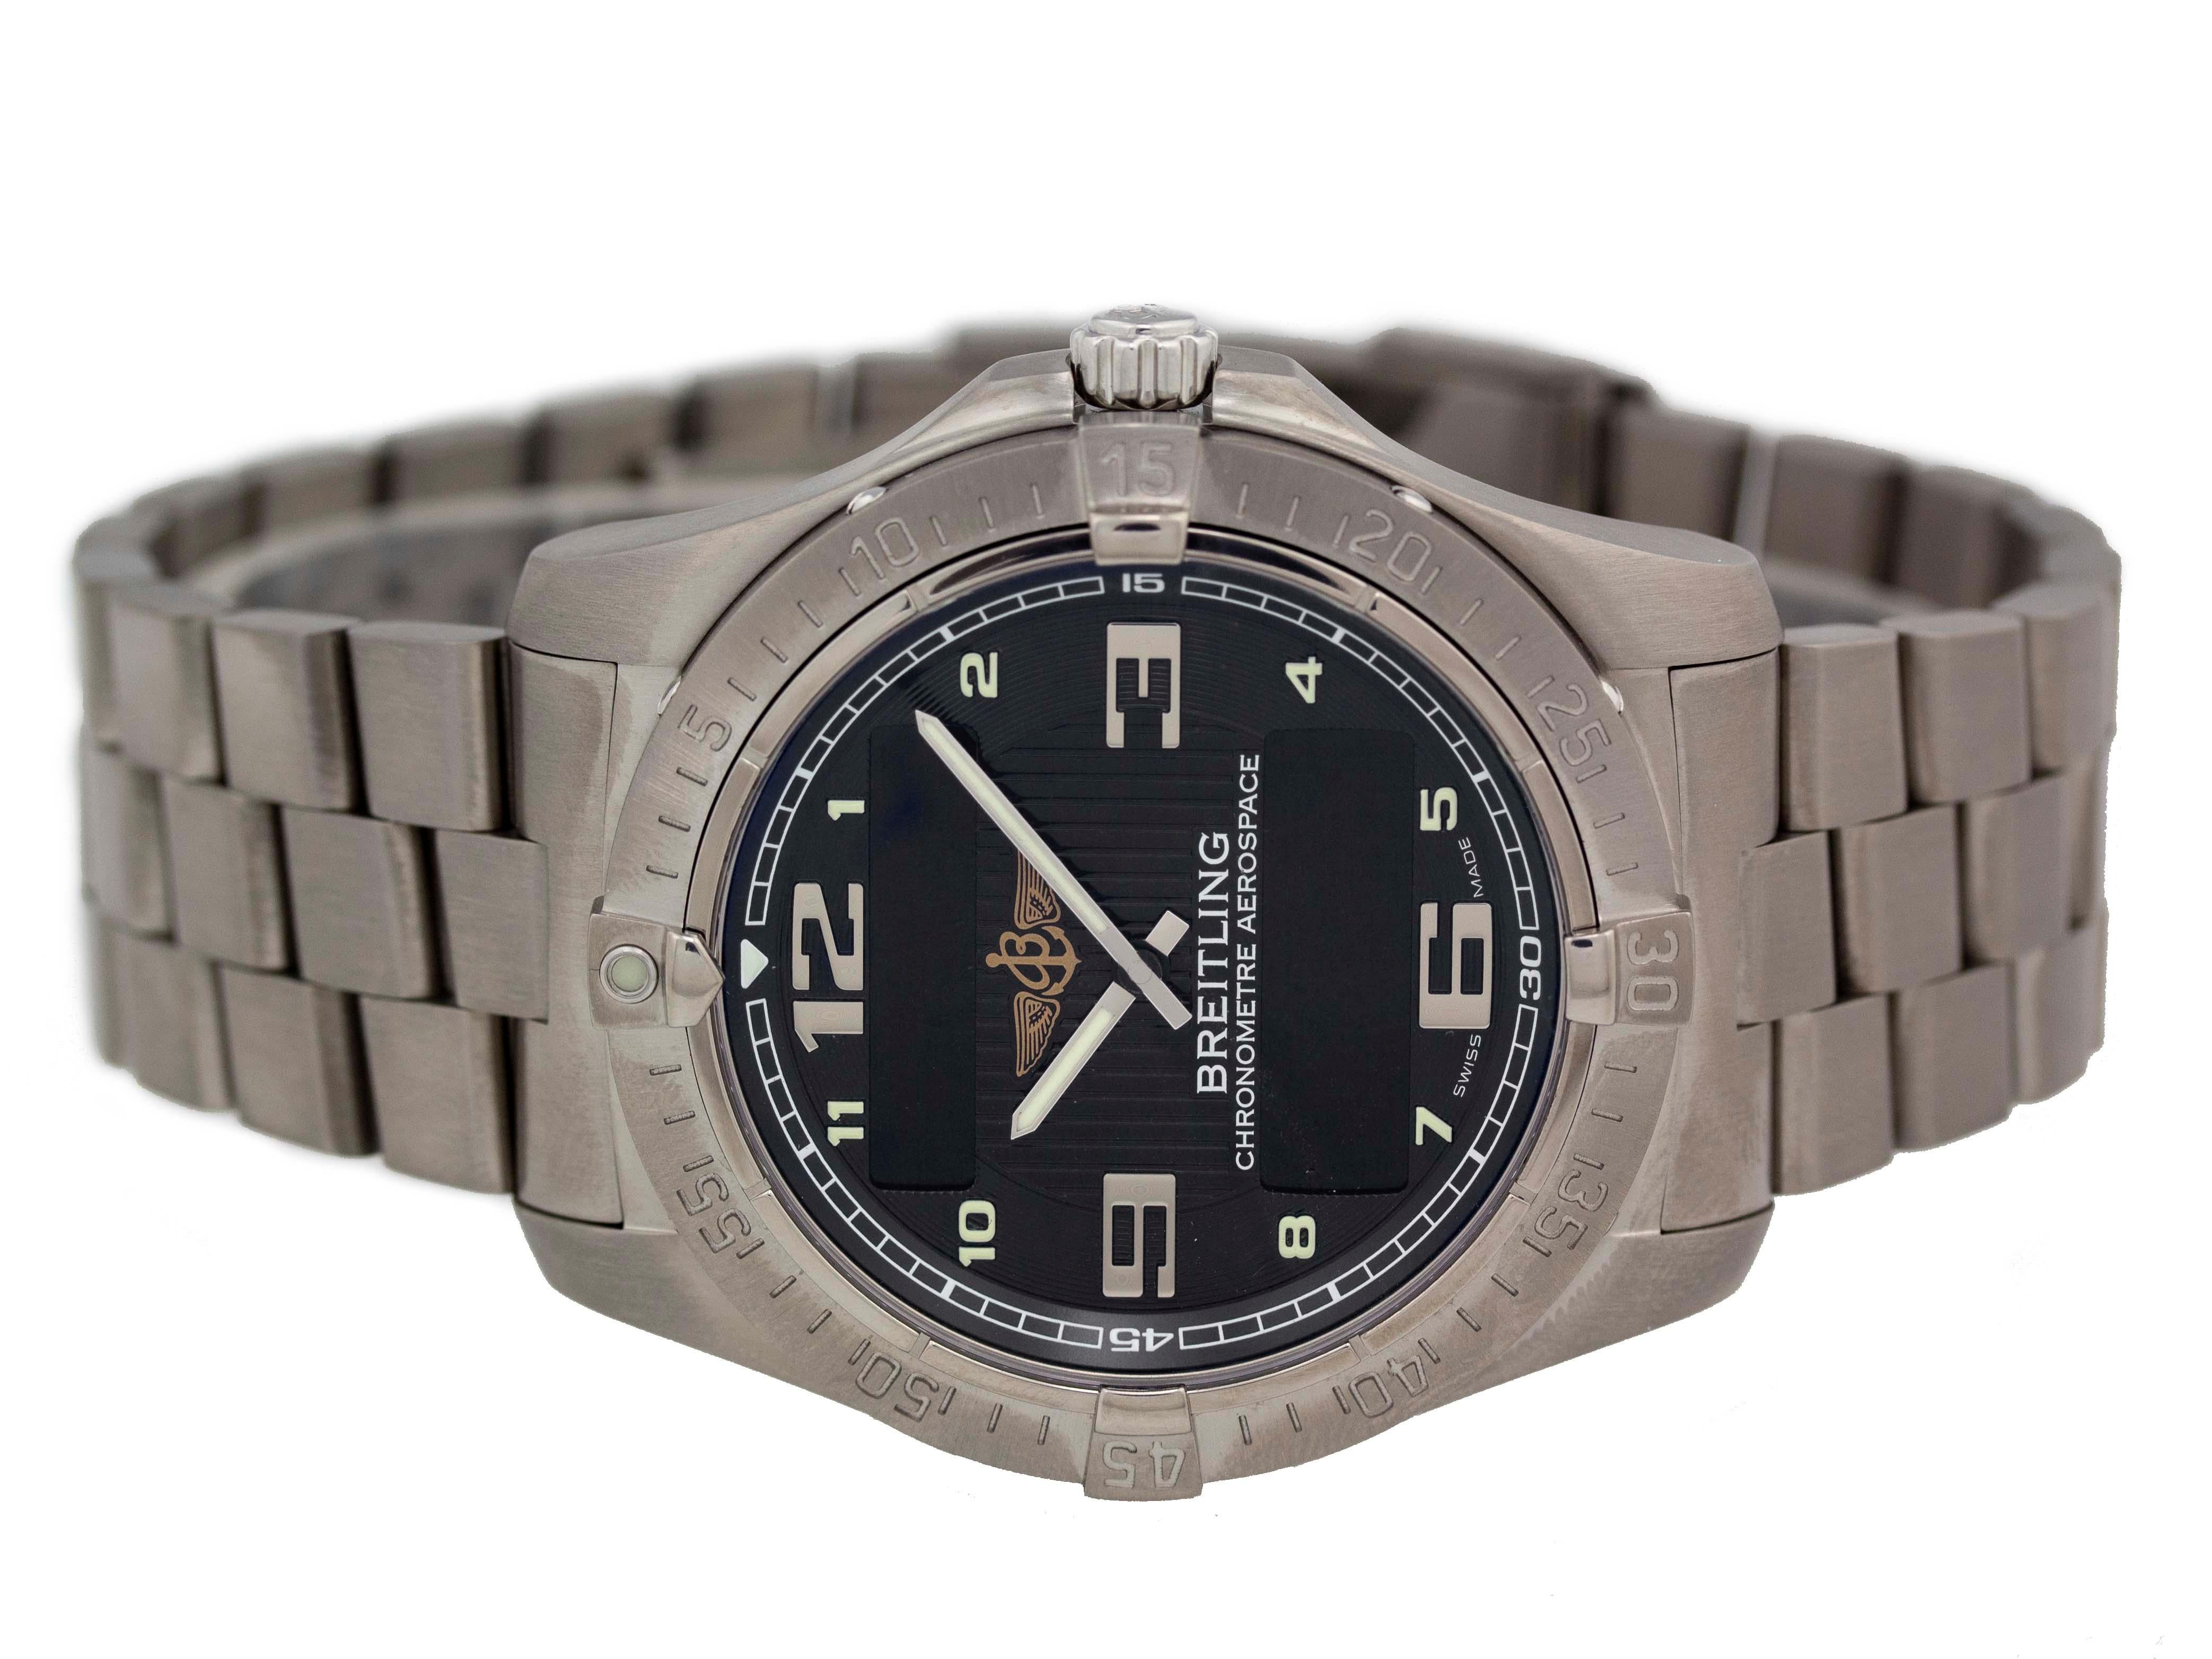 
Brand	Breitling
Series	Professional Aerospace
Model	E7936210/B962
Gender	Men's
Condition	Excellent Pre-owned, Faint Scratches
Material	Titanium
Finish	Brushed
Caseback	Solid
Diameter	42mm
Bezel	Unidirectional Titanium
Crystal	Sapphire Scratch